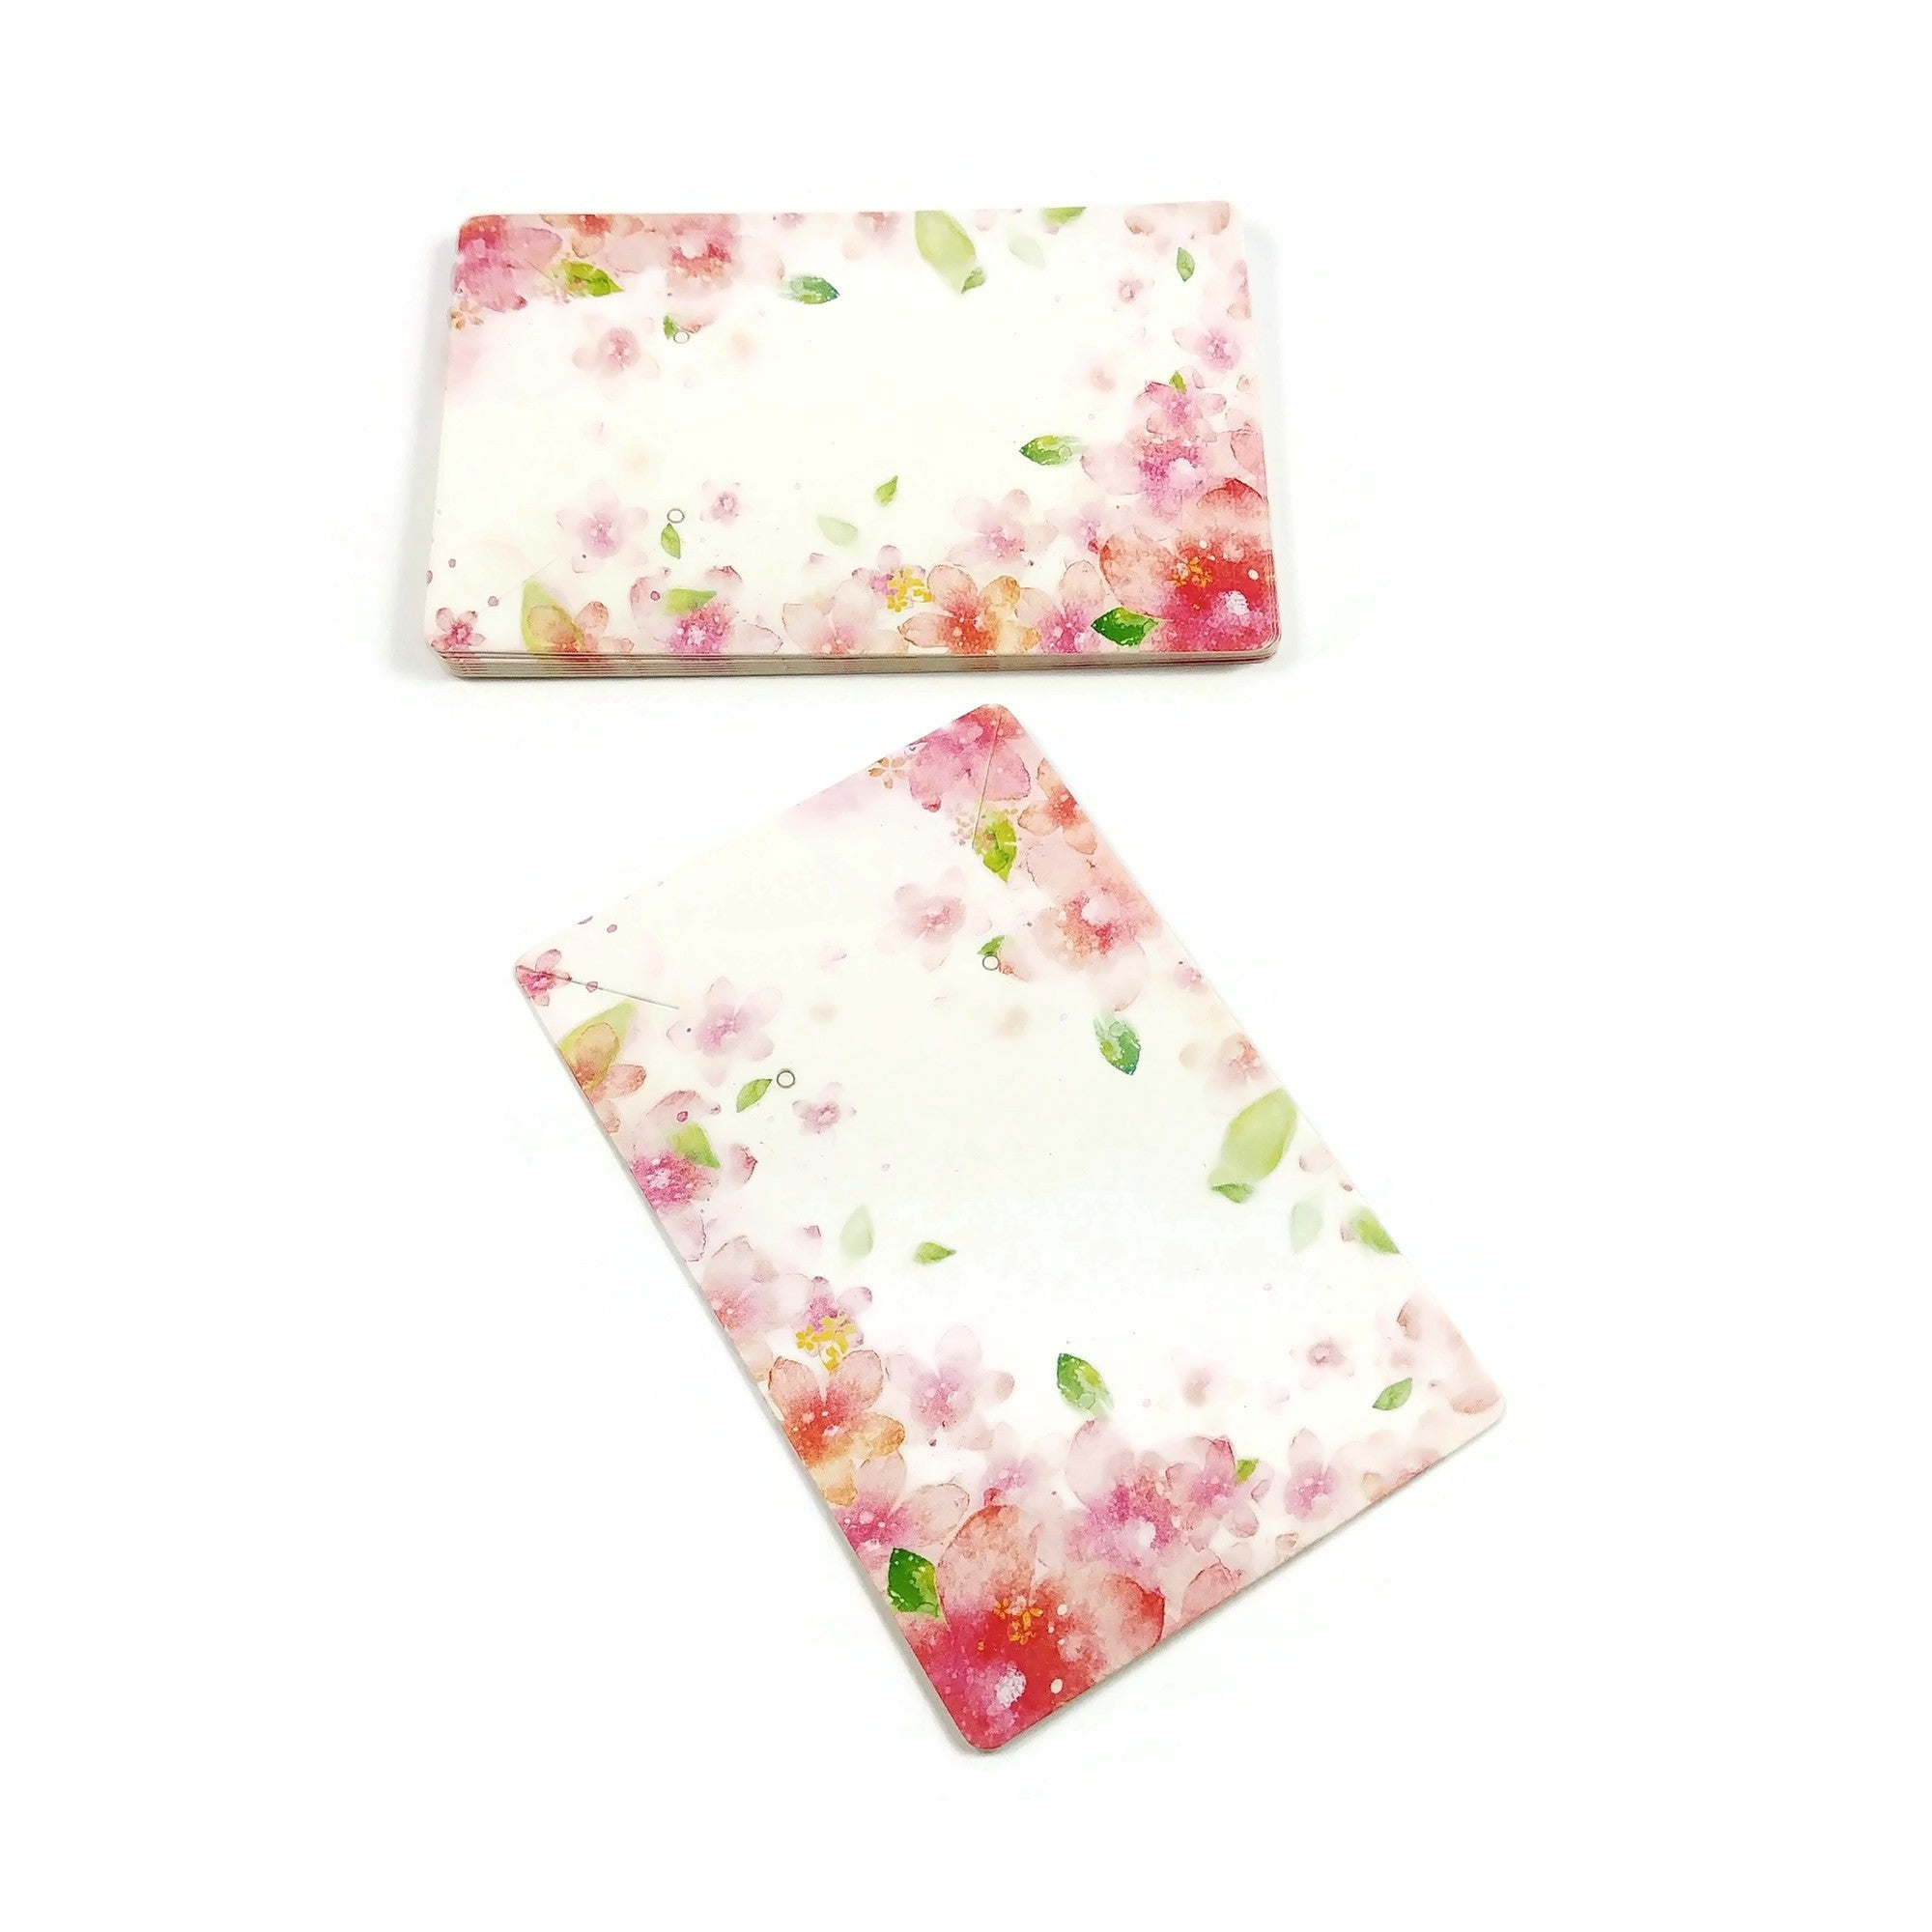 Paper Ear Studs Hang Tag Jewelry Display Card Earring - pink flower pattern